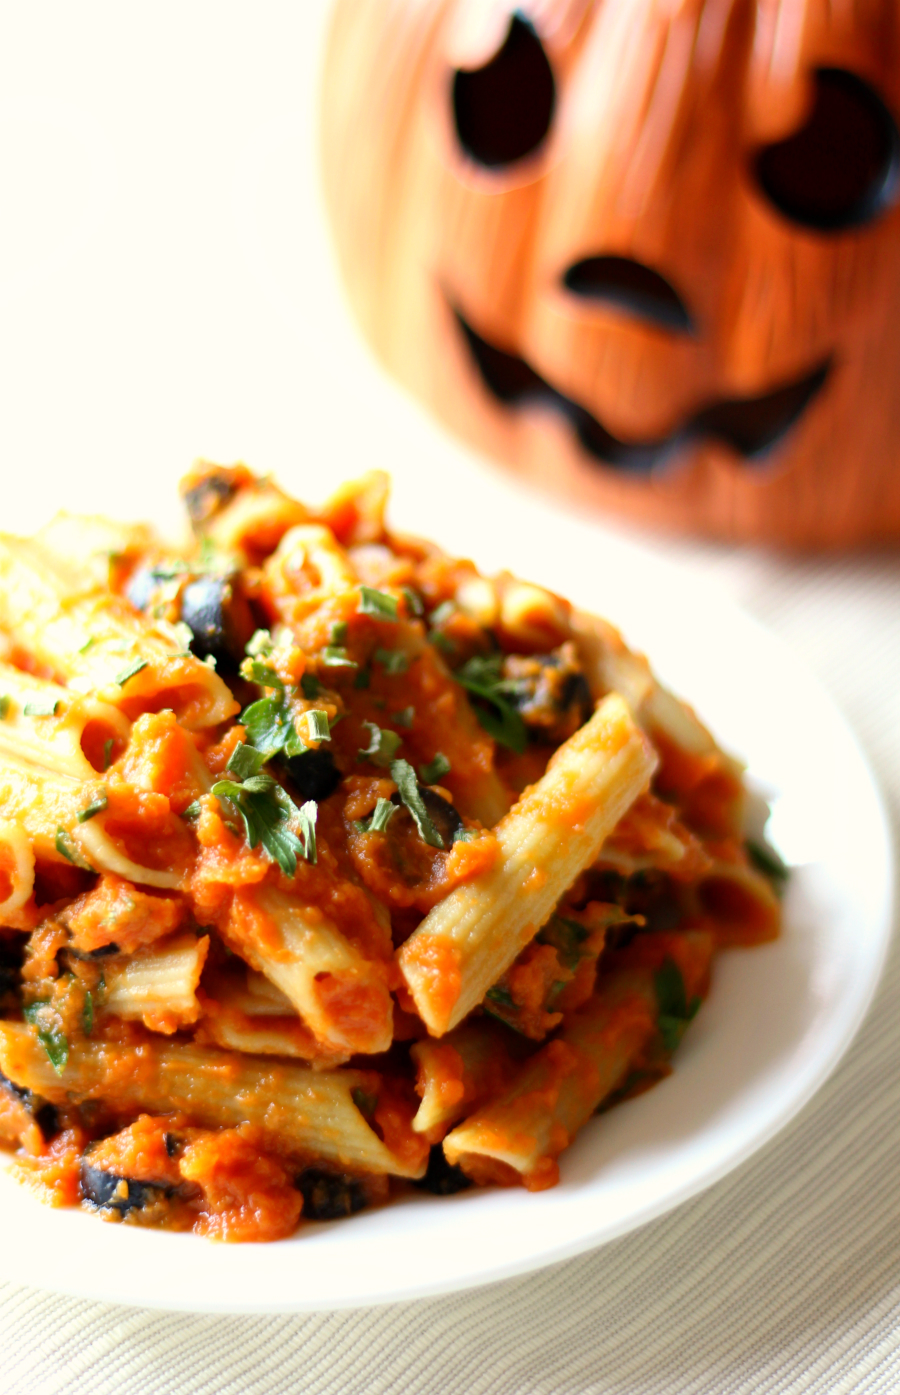 Creamy Autumn Pumpkin Pasta | Strength and Sunshine @RebeccaGF666 A Creamy Autumn Pumpkin Pasta recipe that brings you all the healthy comfort of the season. Gluten-free, nut-free, and vegan, this easy & quick, savory seasonal dinner will warm your soul from the inside out!